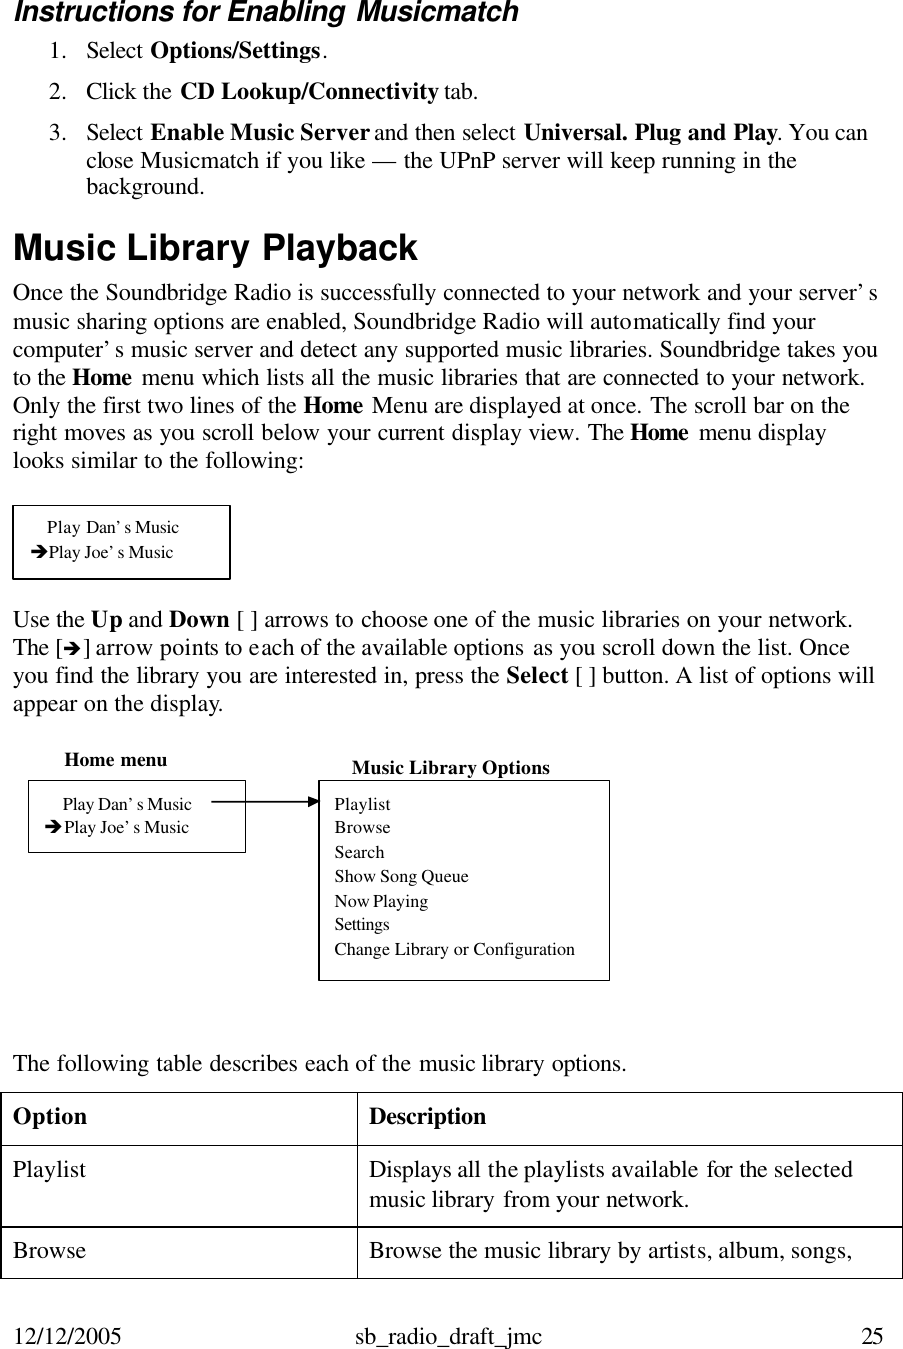 12/12/2005 sb_radio_draft_jmc  25       Play Dan’s Music  èPlay Joe’s Music  Instructions for Enabling Musicmatch  1. Select Options/Settings.  2. Click the CD Lookup/Connectivity tab.  3. Select Enable Music Server and then select Universal. Plug and Play. You can close Musicmatch if you like — the UPnP server will keep running in the background.  Music Library Playback  Once the Soundbridge Radio is successfully connected to your network and your server’s music sharing options are enabled, Soundbridge Radio will automatically find your computer’s music server and detect any supported music libraries. Soundbridge takes you to the Home menu which lists all the music libraries that are connected to your network. Only the first two lines of the Home Menu are displayed at once. The scroll bar on the right moves as you scroll below your current display view. The Home  menu display looks similar to the following:     Use the Up and Down [ ] arrows to choose one of the music libraries on your network. The [è] arrow points to each of the available options as you scroll down the list. Once you find the library you are interested in, press the Select [ ] button. A list of options will appear on the display.          The following table describes each of the music library options.  Option Description   Playlist Displays all the playlists available for the selected music library from your network.   Browse Browse the music library by artists, album, songs, Music Library Options Home menu    Play Dan’s Music  èPlay Joe’s Music Playlist  Browse Search Show Song Queue Now Playing   Settings  Change Library or Configuration 